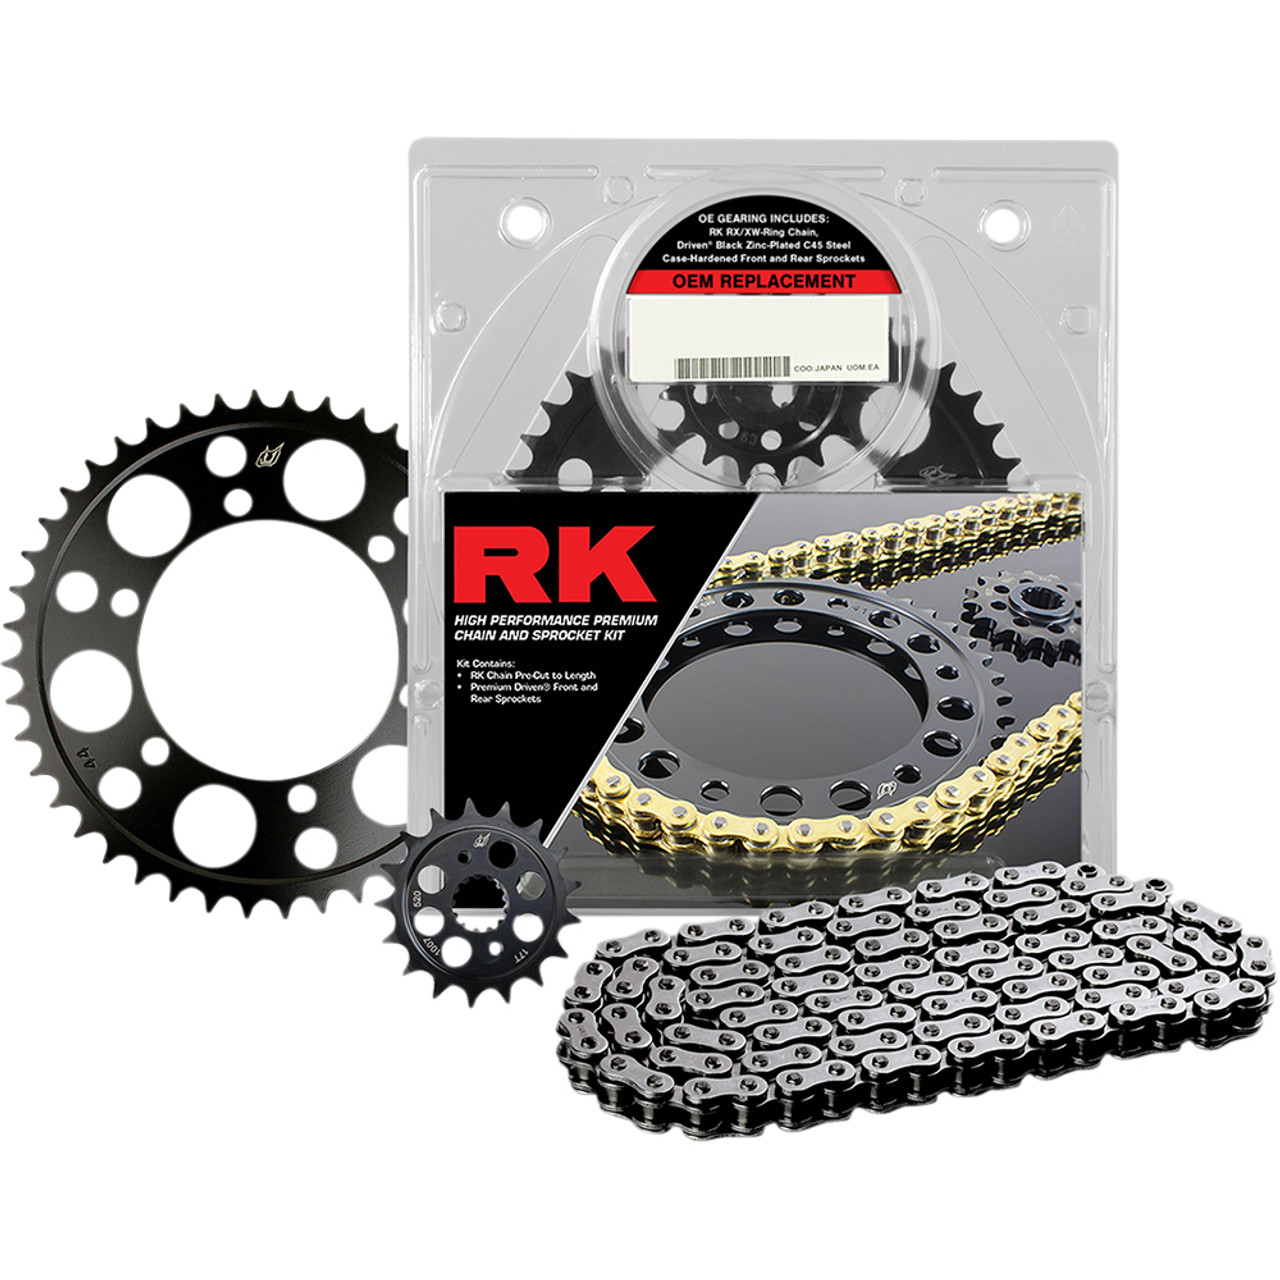 RK / Driven Yamaha YZF-R6 06-20 OEM Replacement Chain and Sprocket Kit